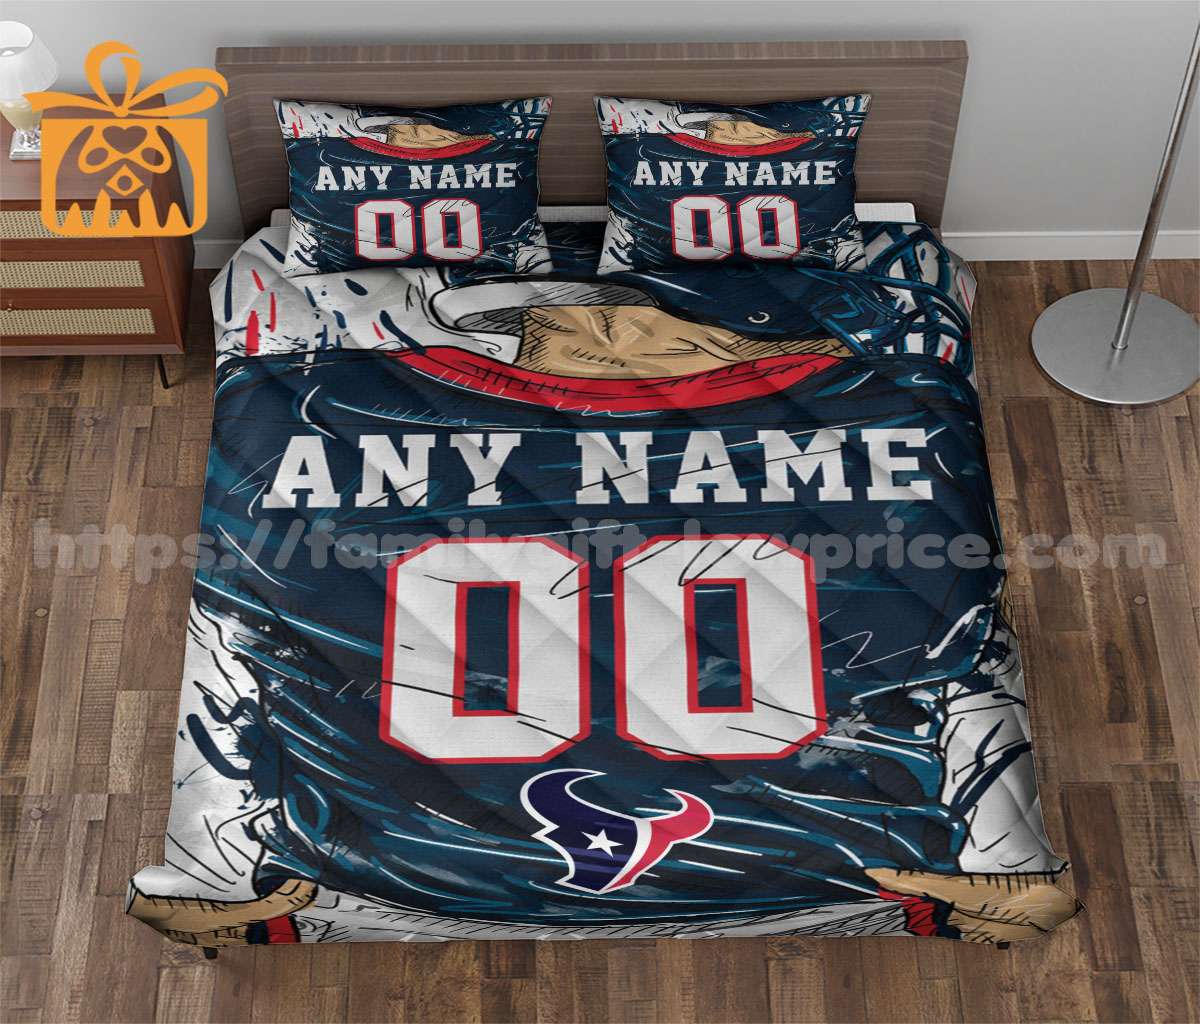 NFL Texans Jersey Customized Quilt Bedding Set - Custom Any Name and Number for Men Women